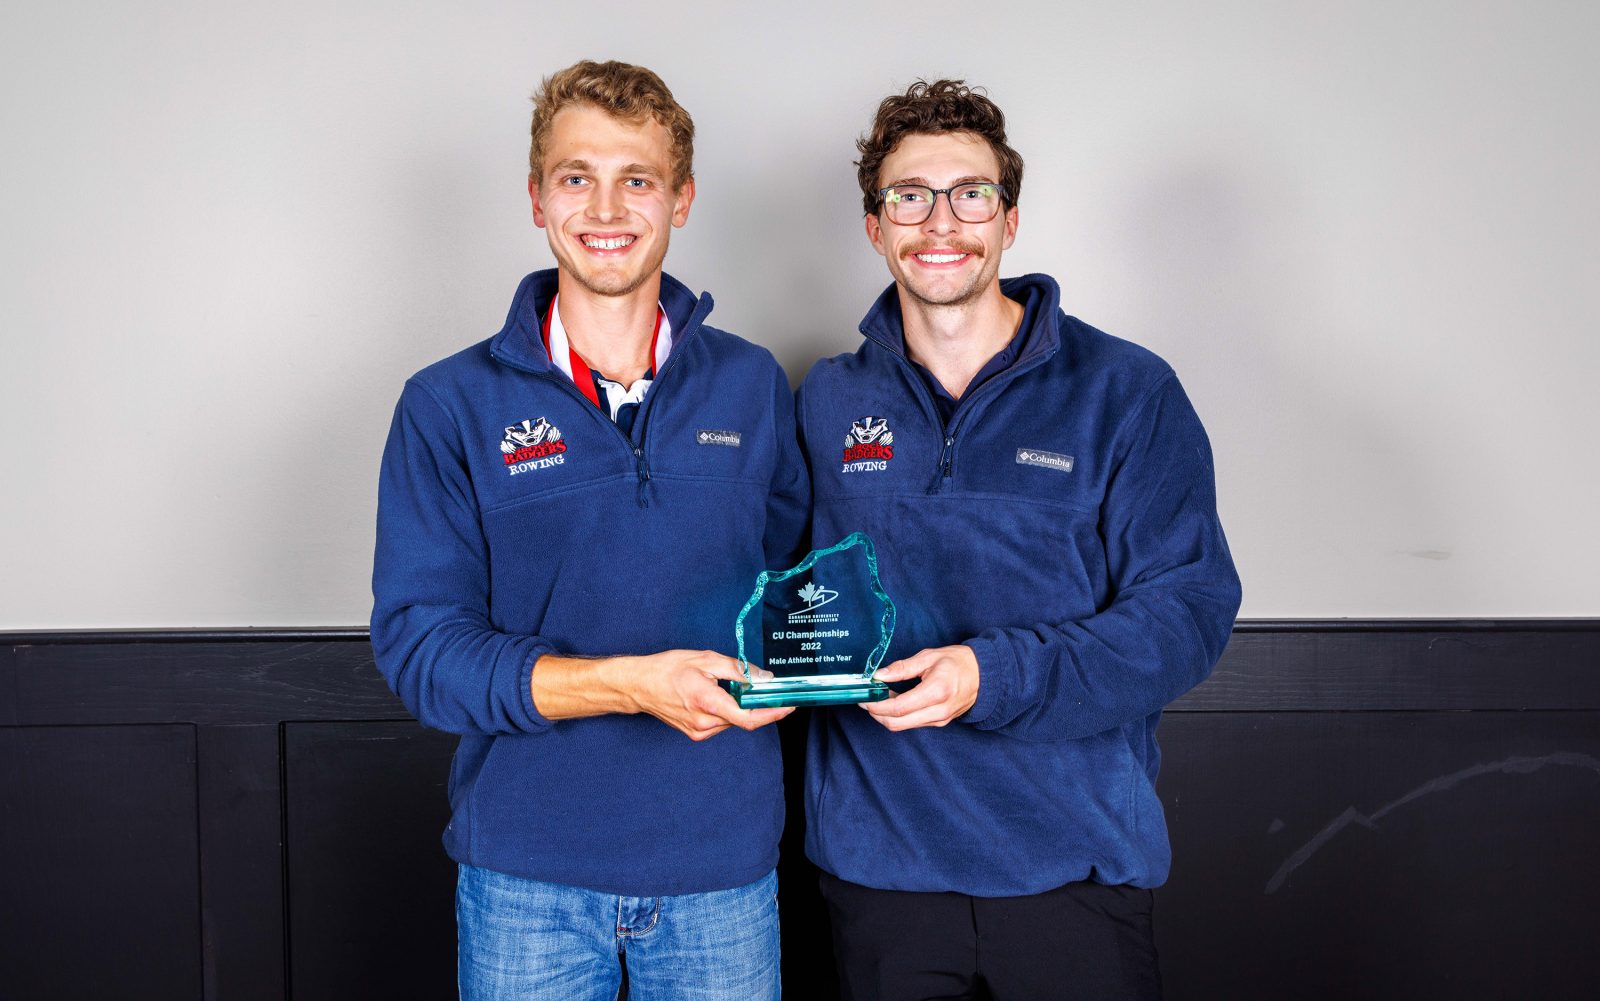 Two men stand holding an award between them.